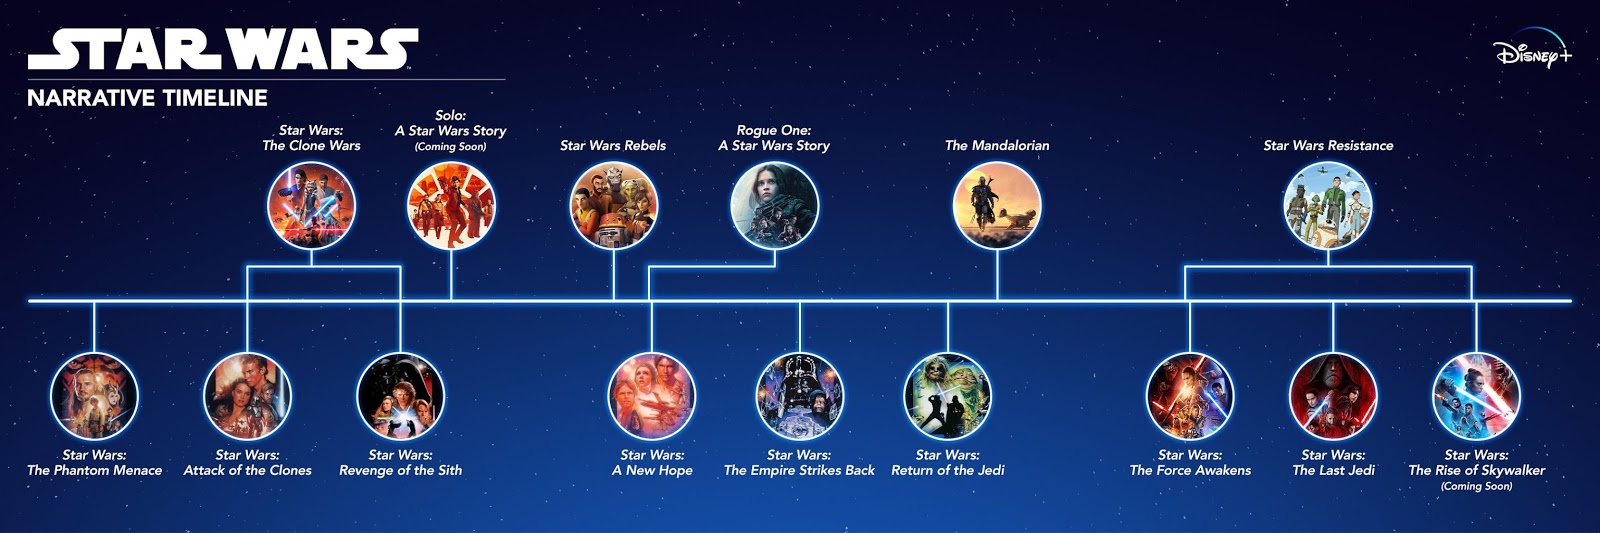 The chronological timeline order of the Star Wars movies ...